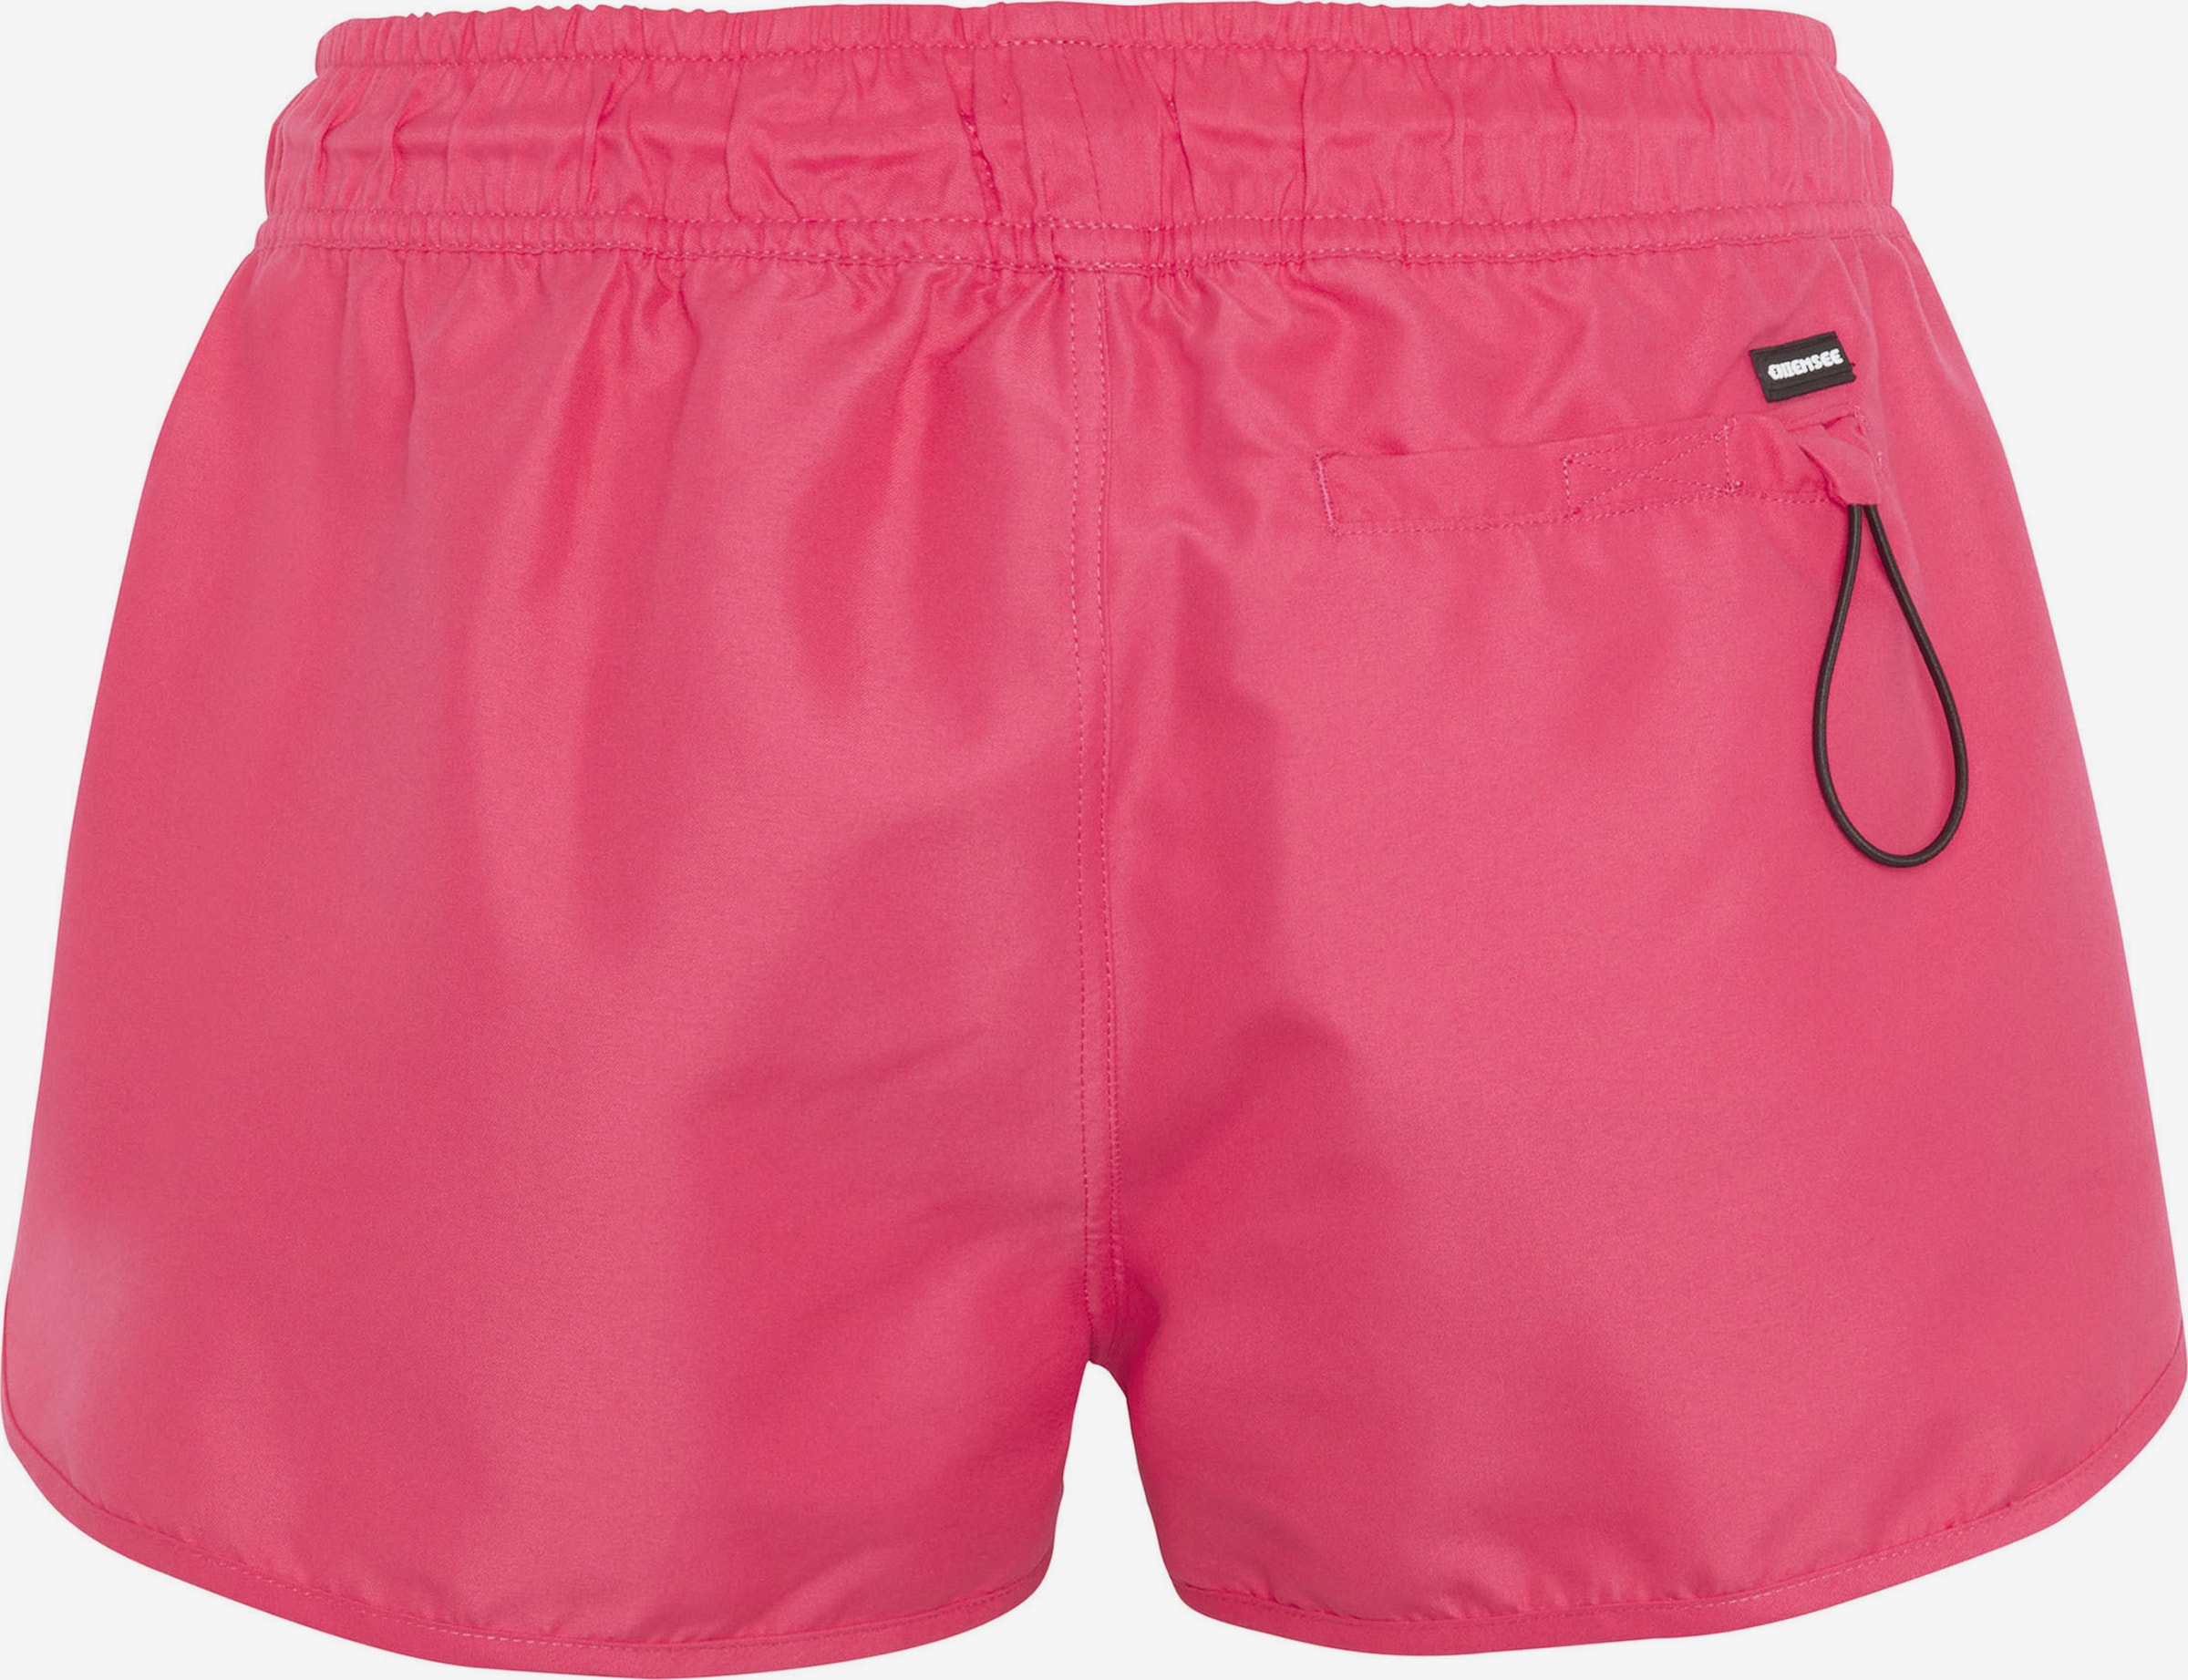 CHIEMSEE Regular Badeshorts in Pink | ABOUT YOU